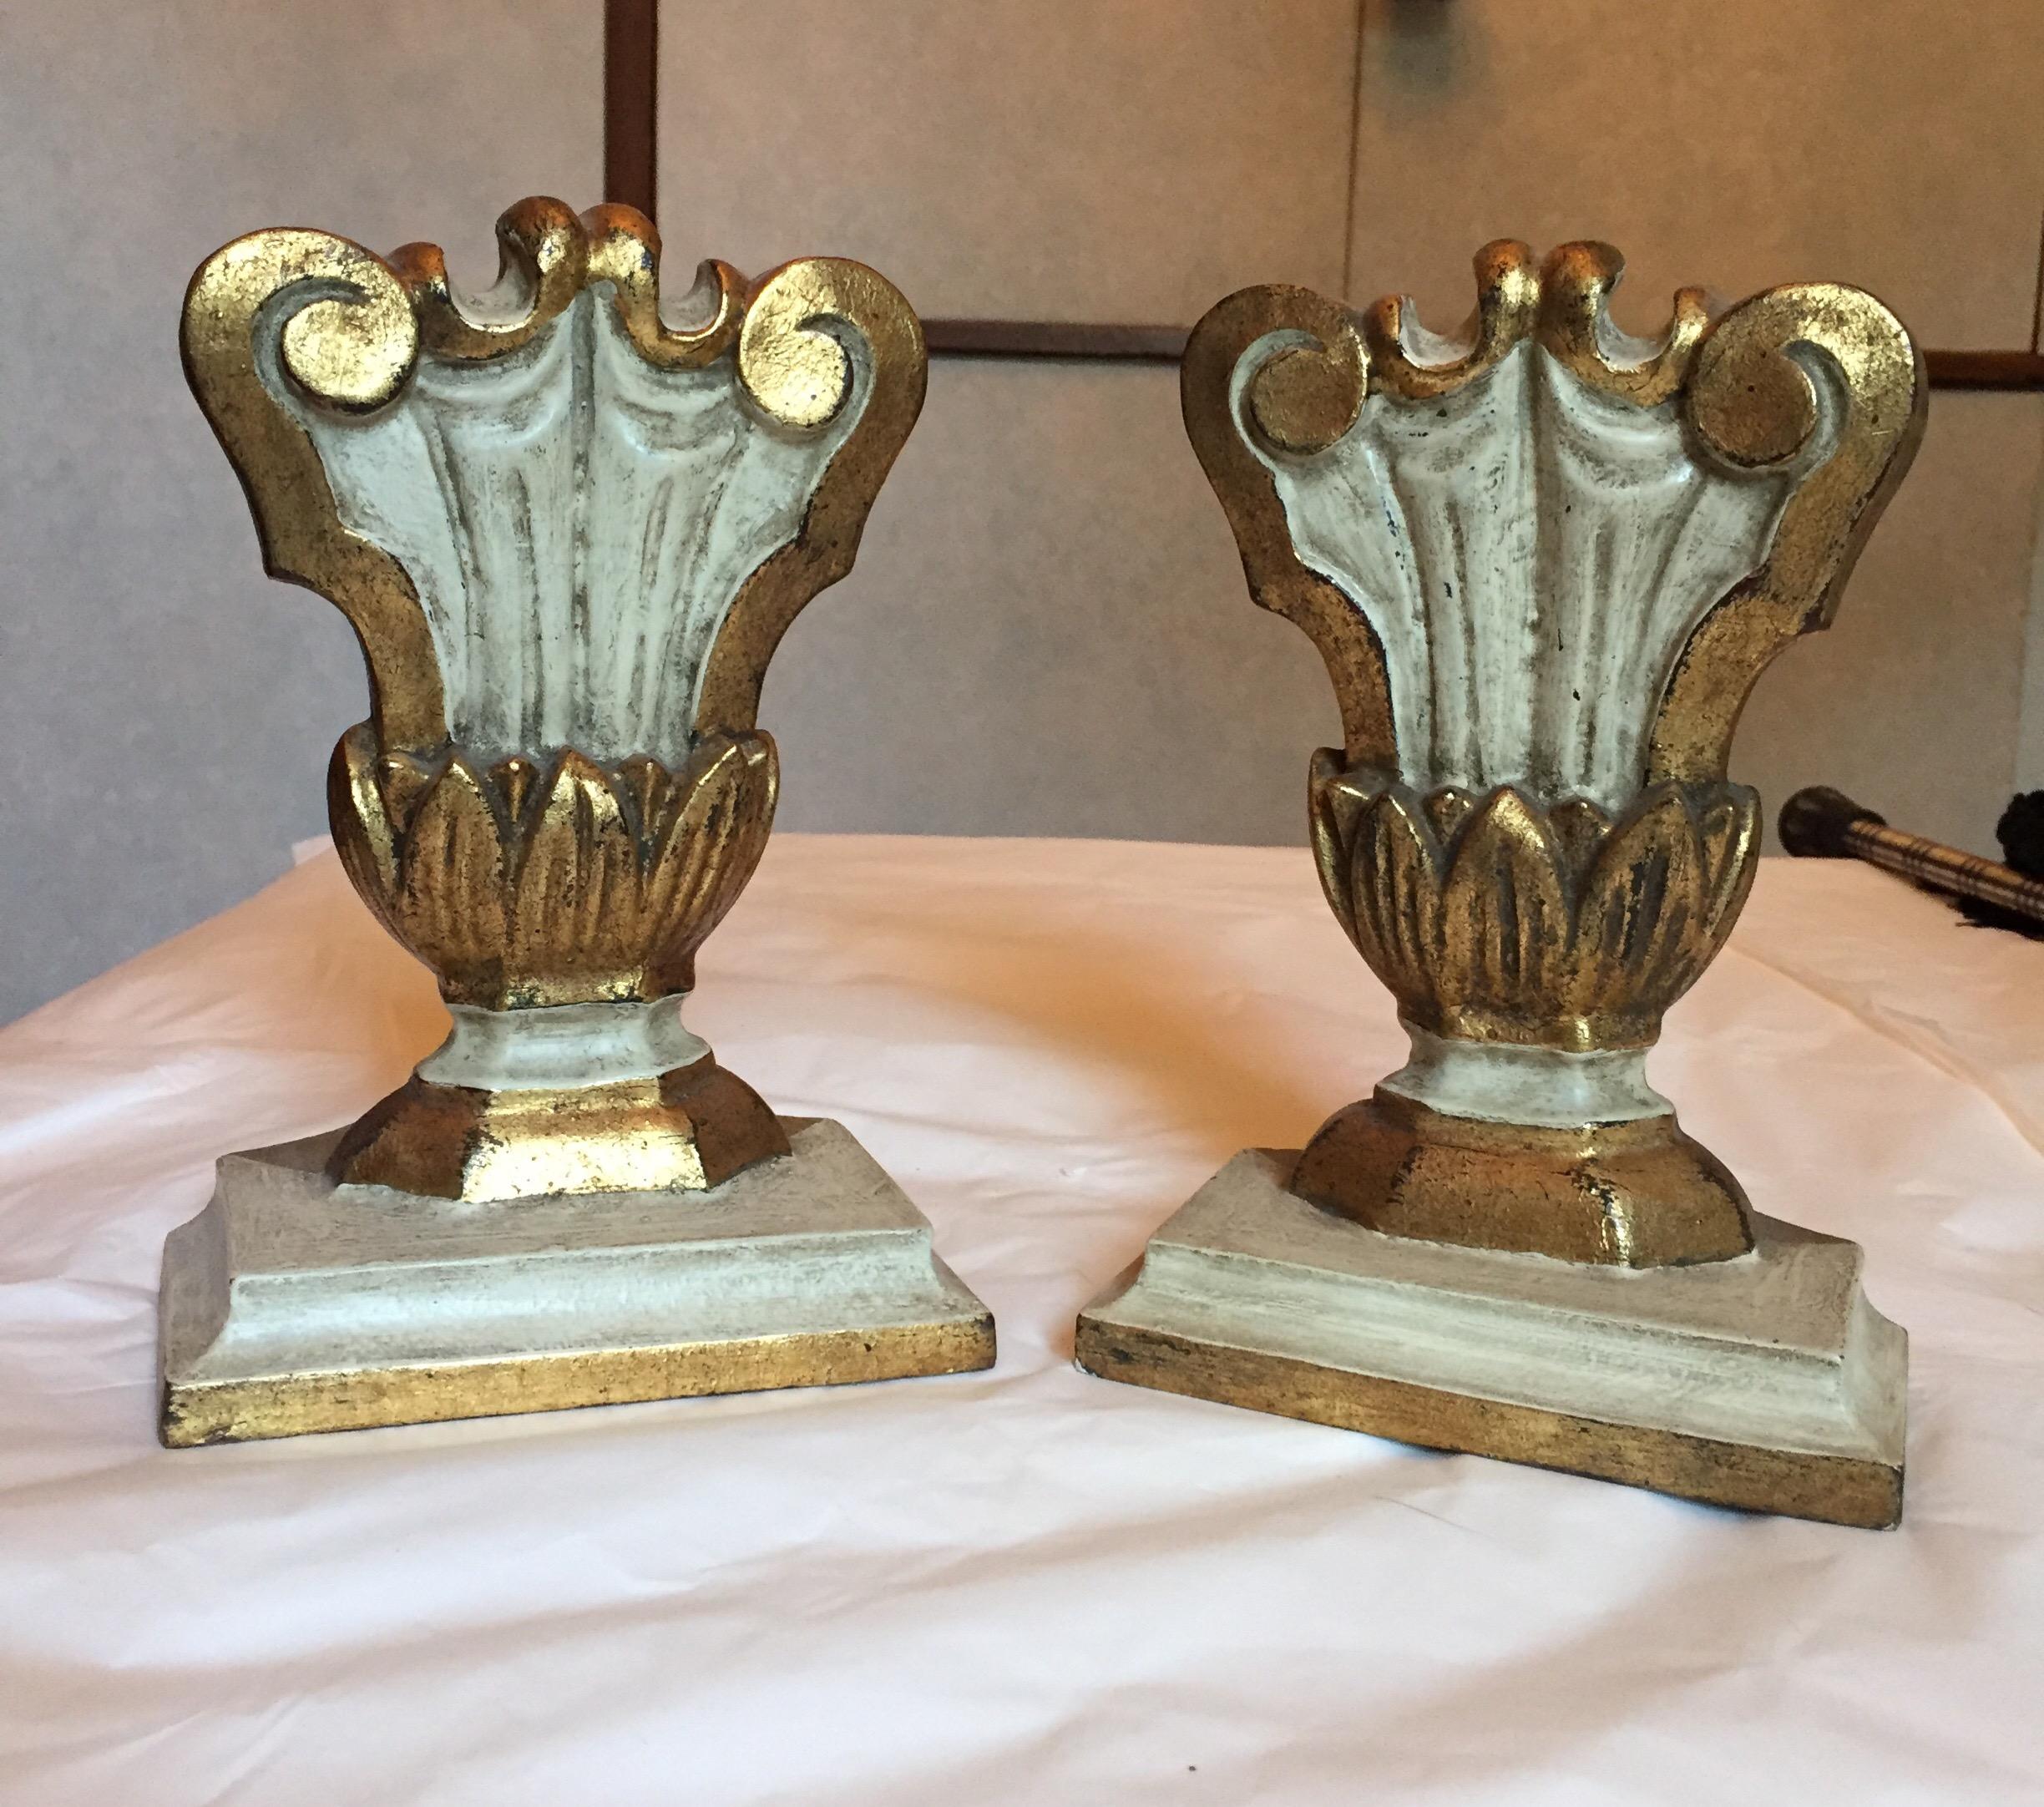 20th Century Pair of Italian White and Mecca Giltwood Hand Carved Lamp Bases Verona, 1980 For Sale